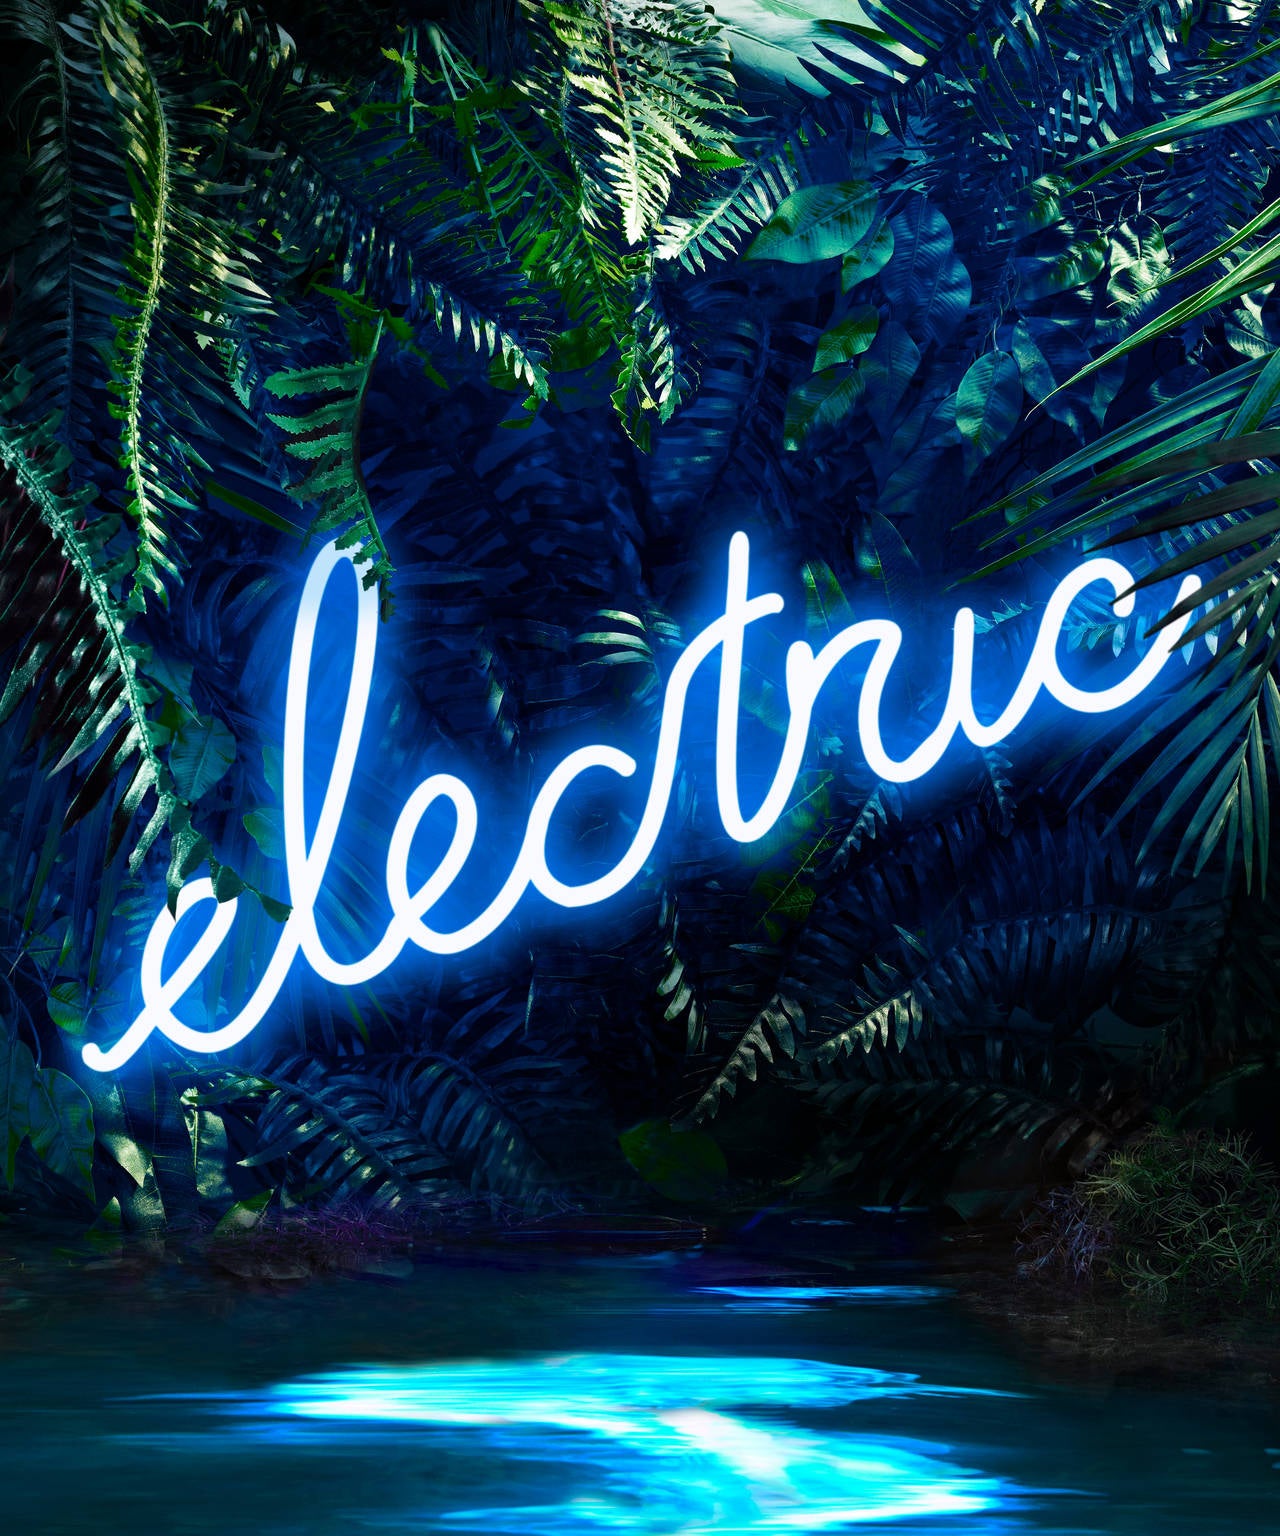 Disco in the Jungle: Electric Blue - Print by Yee Wong